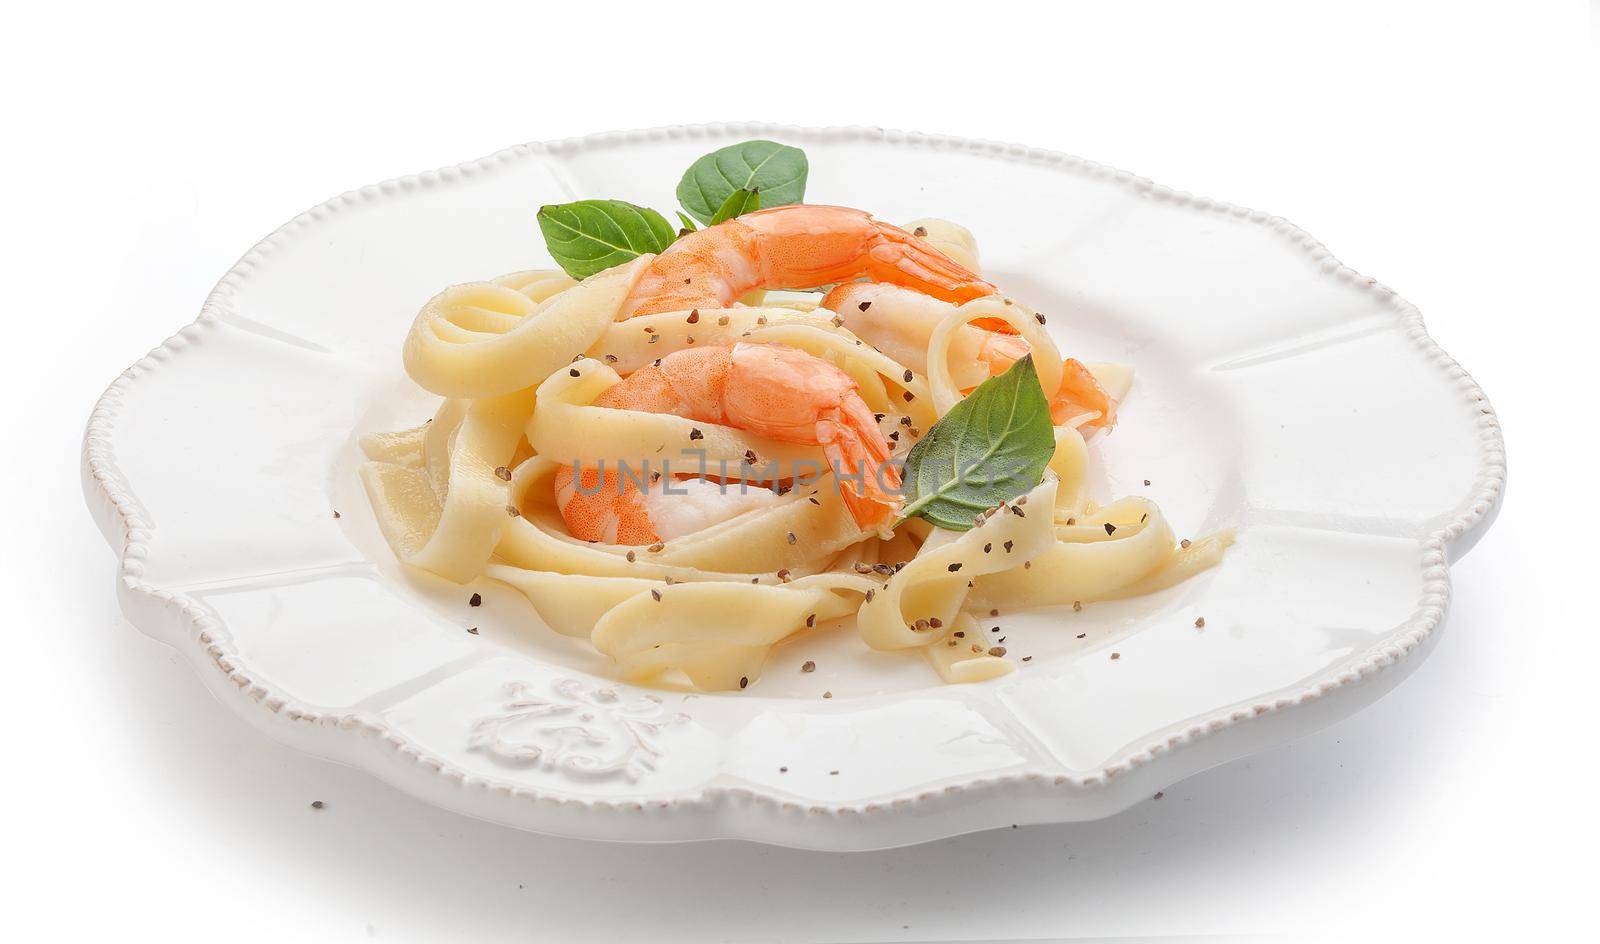 Boiled shrimps  with pasta by Angorius